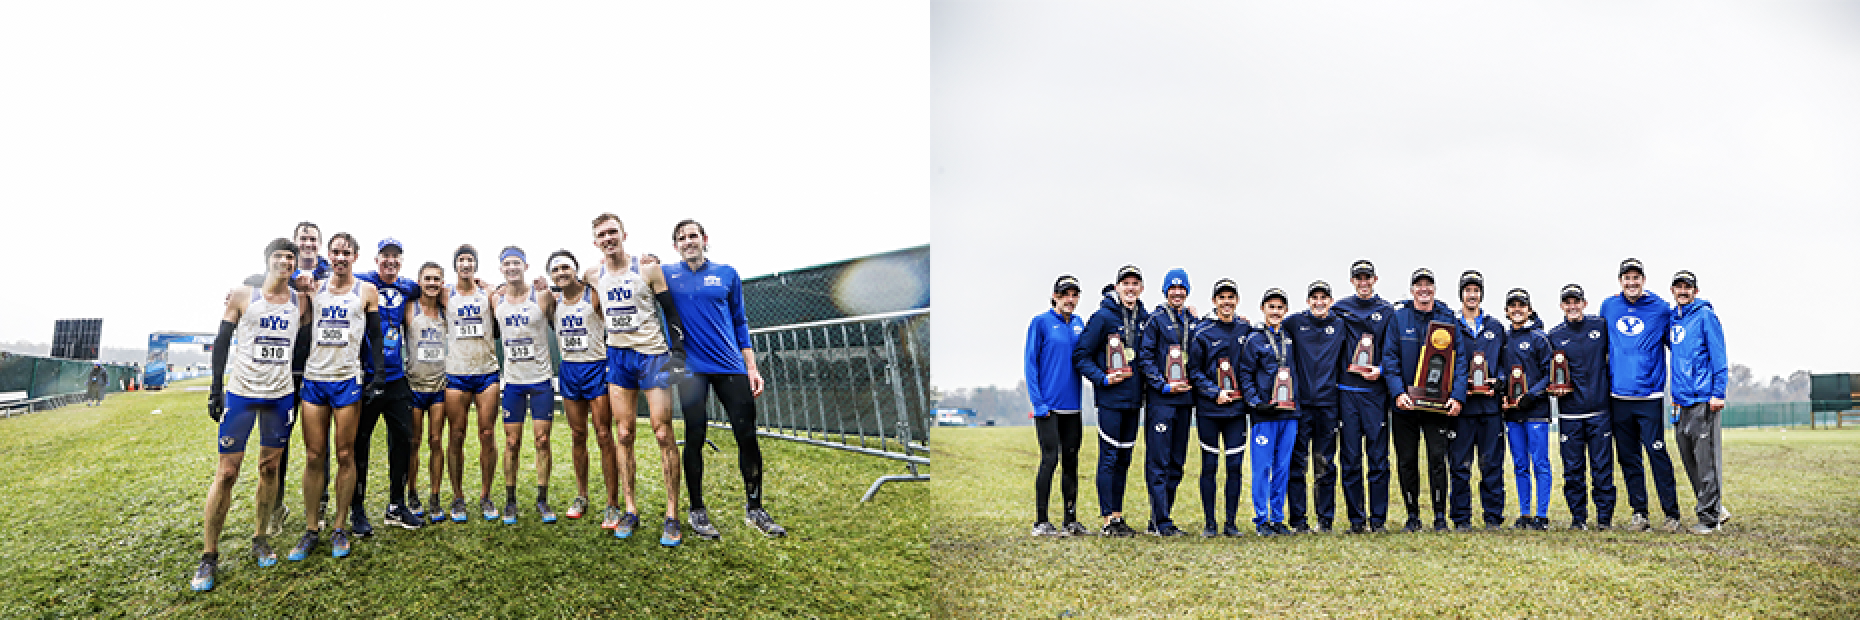 BYU Cougars finish a gritty race in the mud en route to the program's first national title.